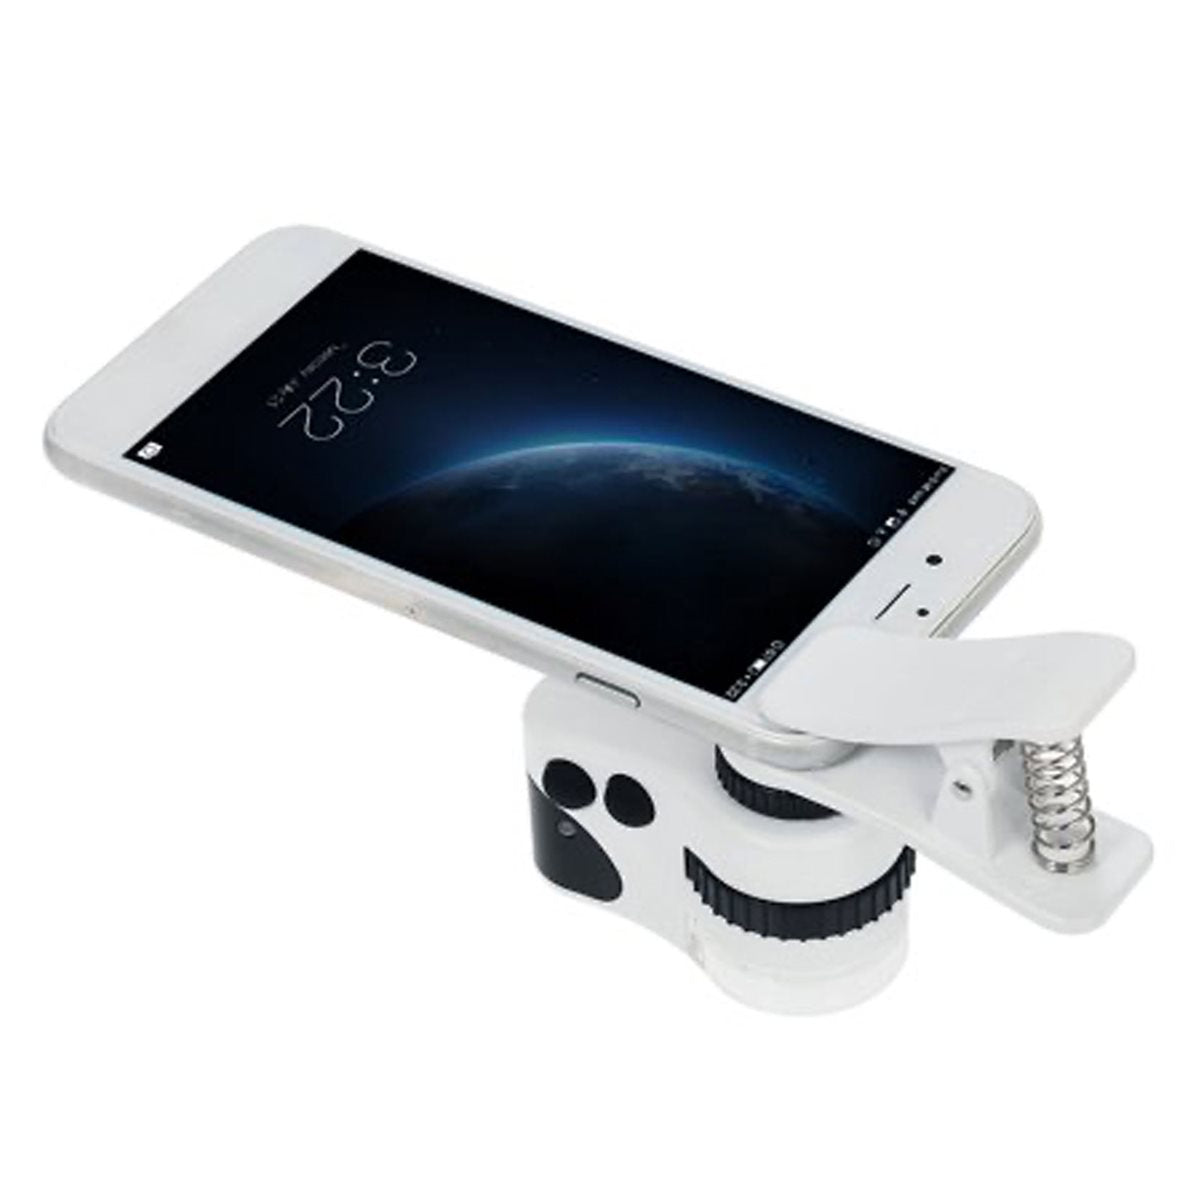 Alfred Phone Microscope 60x with USB Charger